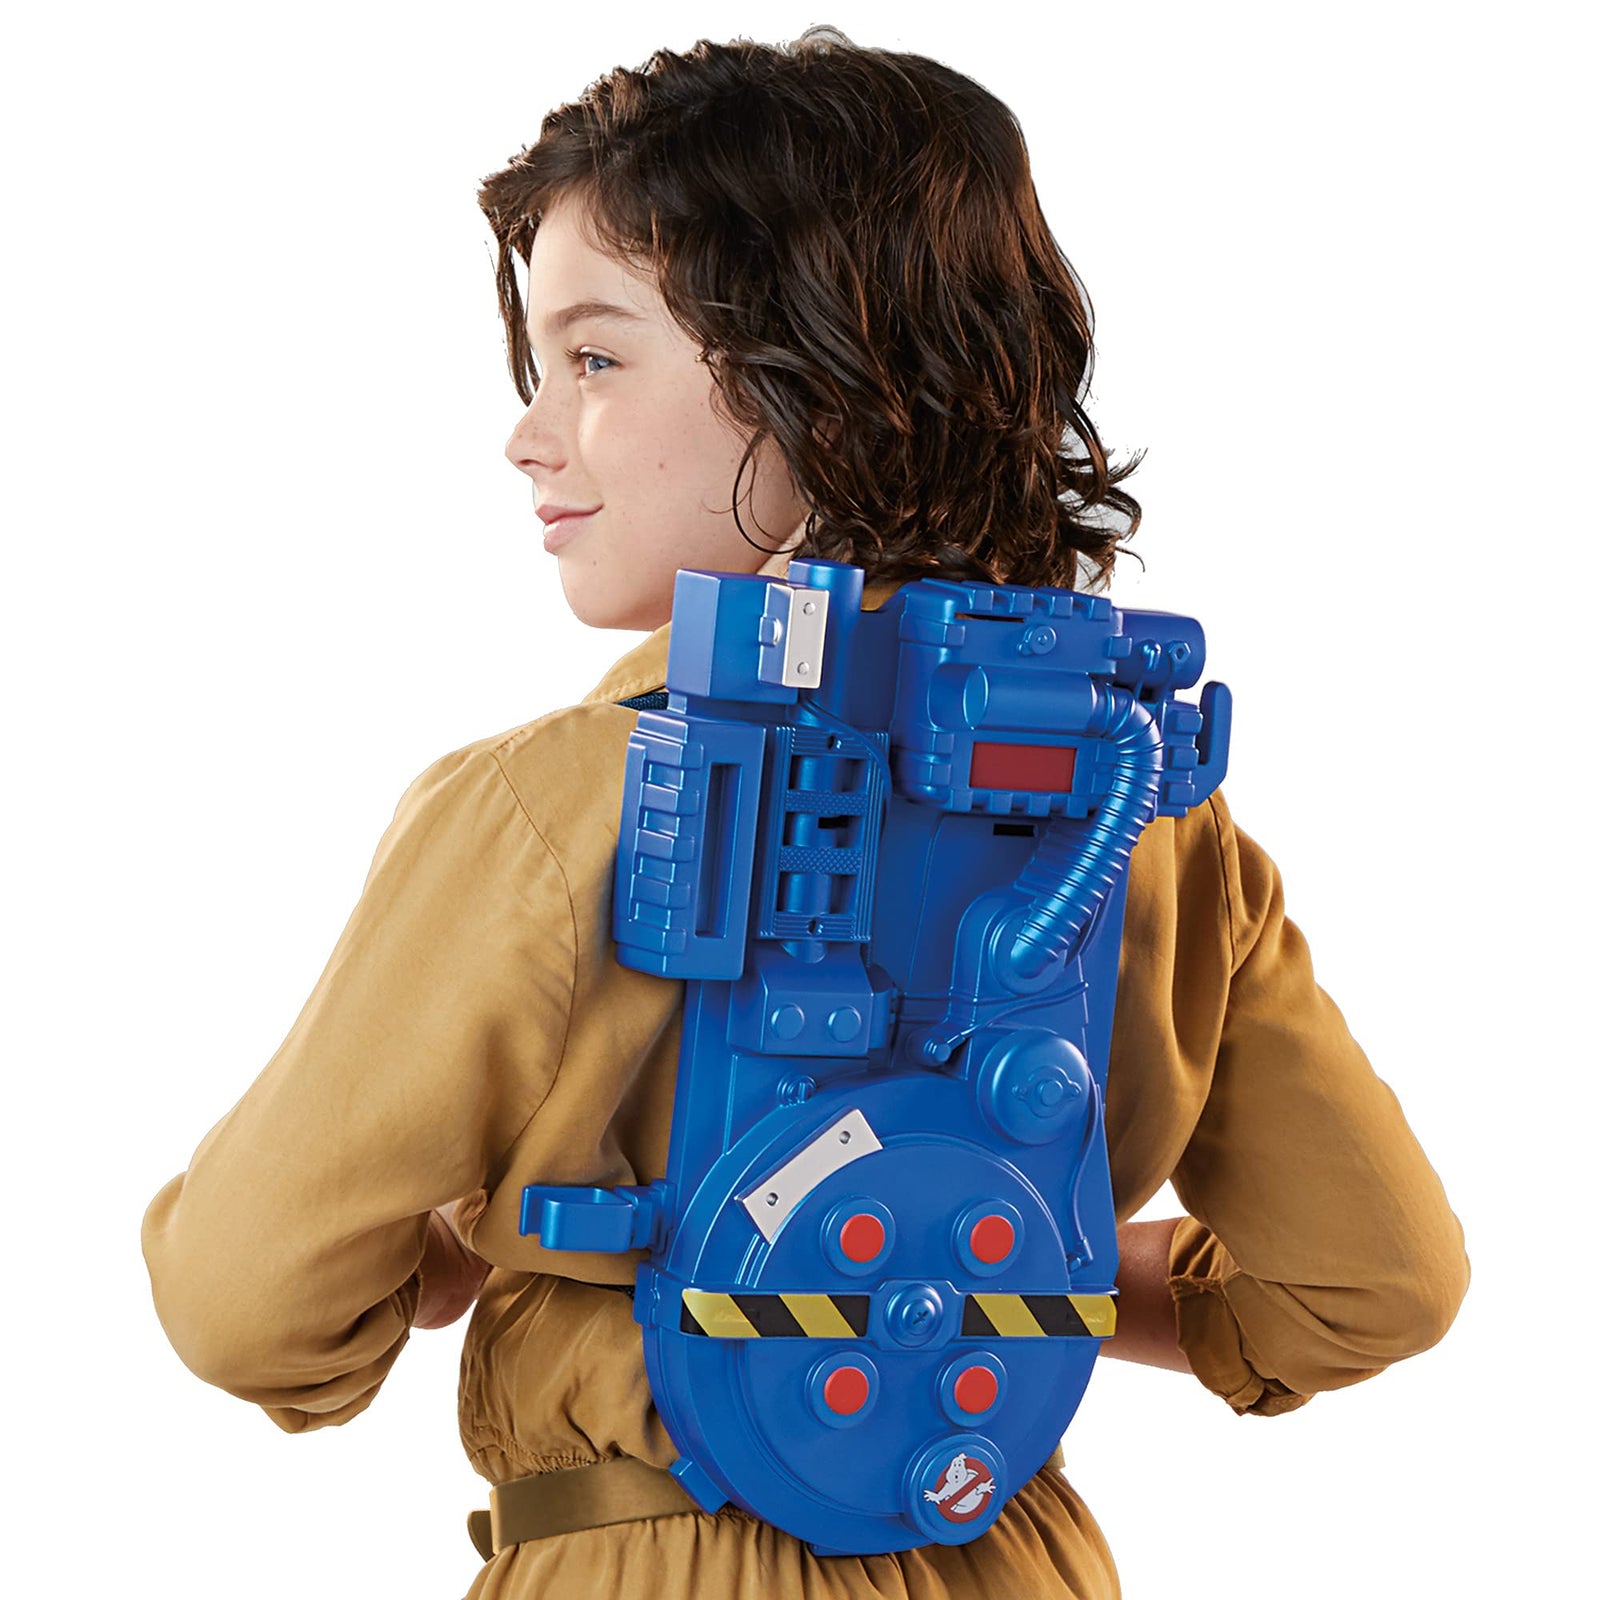 Hasbro Ghostbusters Movie Proton Pack Roleplay Gear for Kids Ages 5 and Up, Classic Blue Toy, Great Gift for Kids